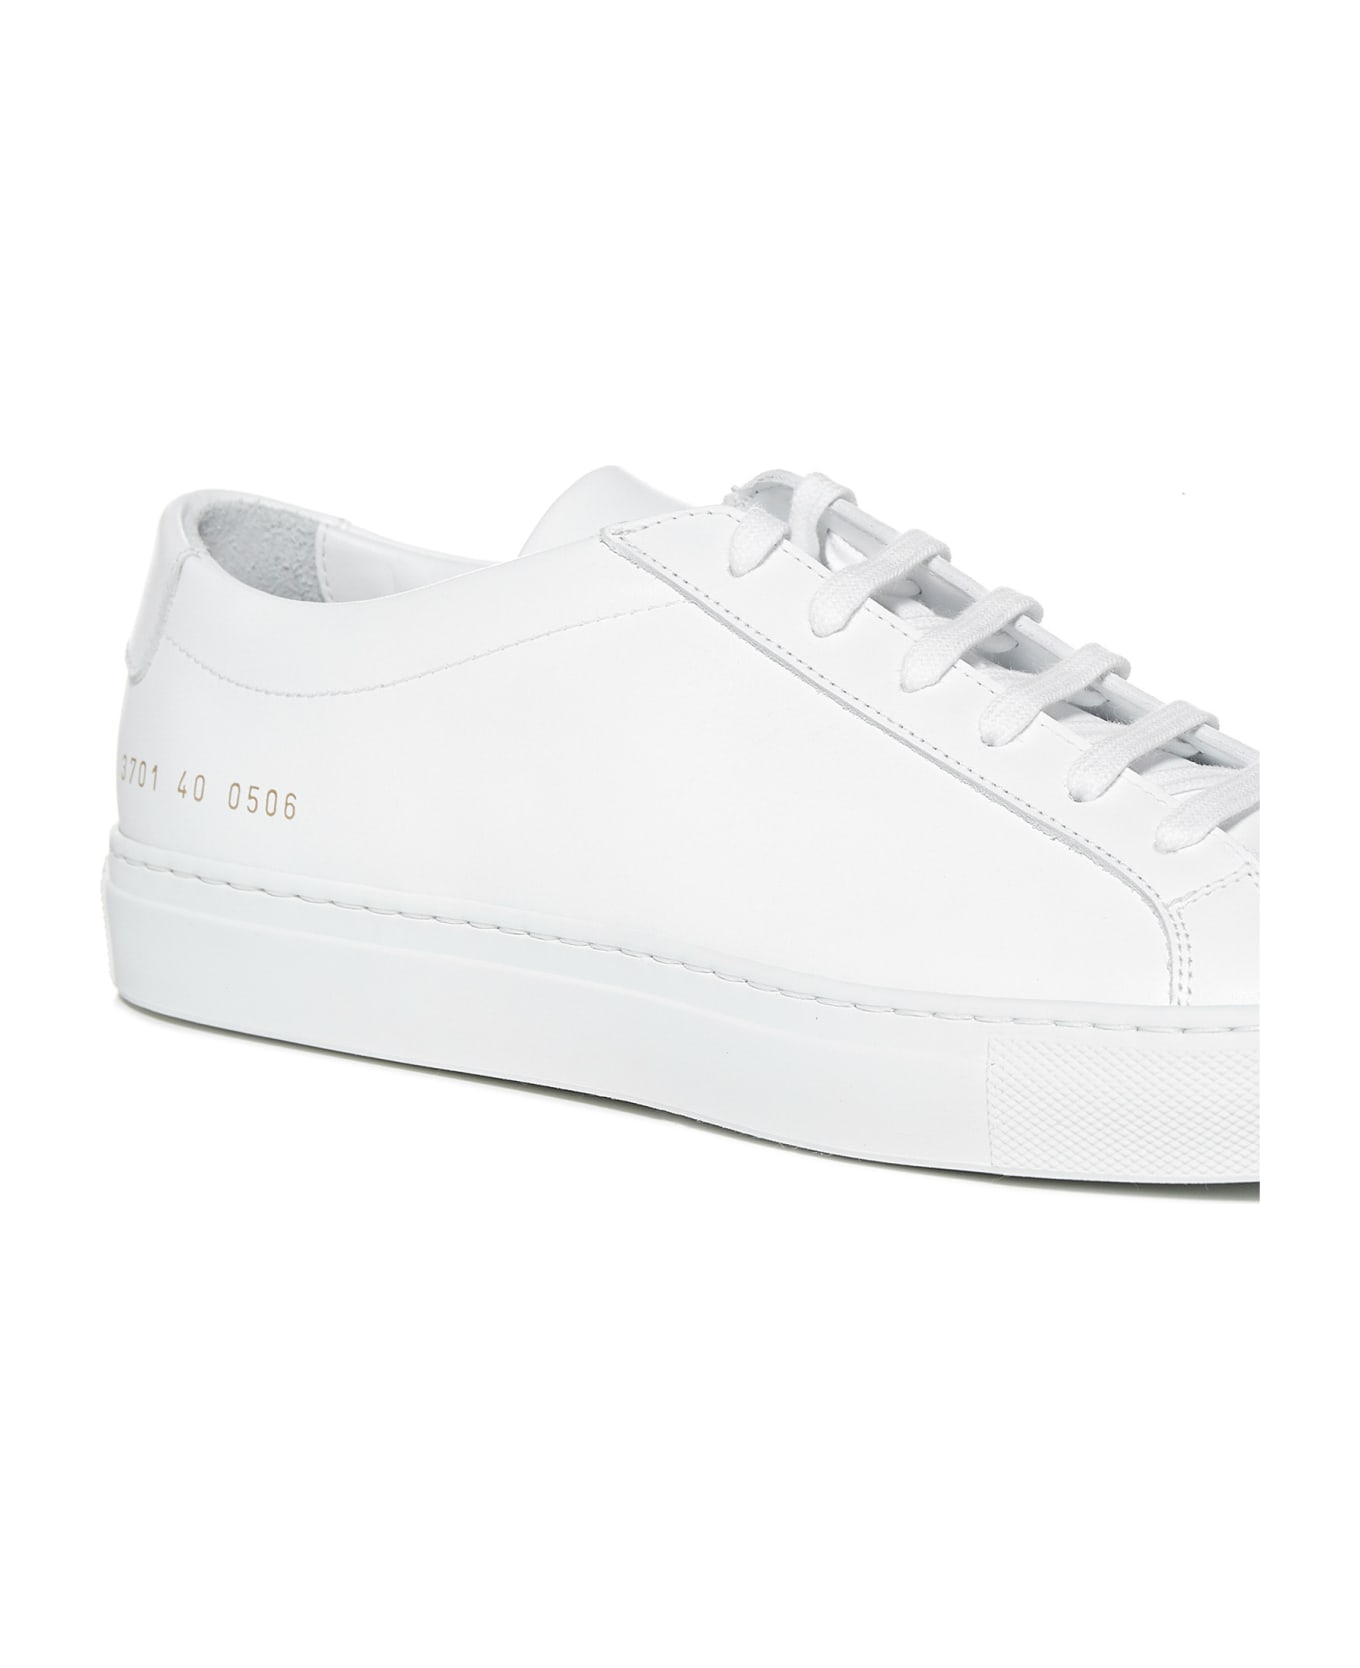 Common Projects Original Achilles Sneakers - White